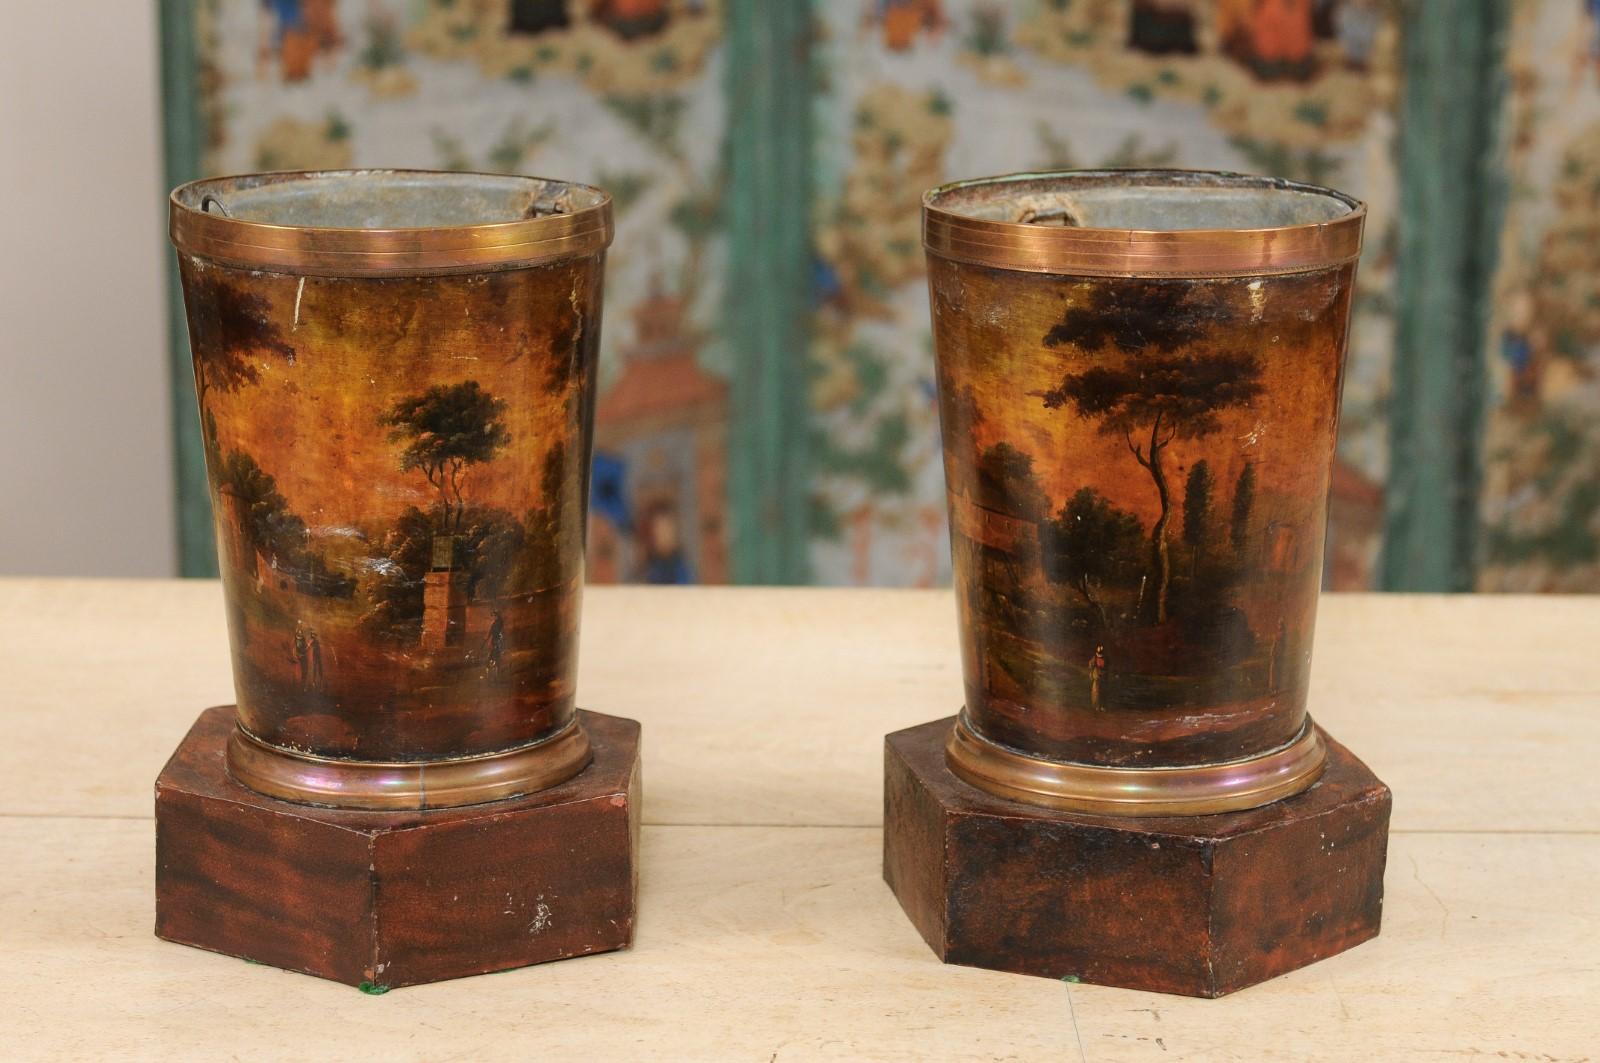  19th Century Painted Tole Cachepots with Landscape Scenes, 19th Century France 4